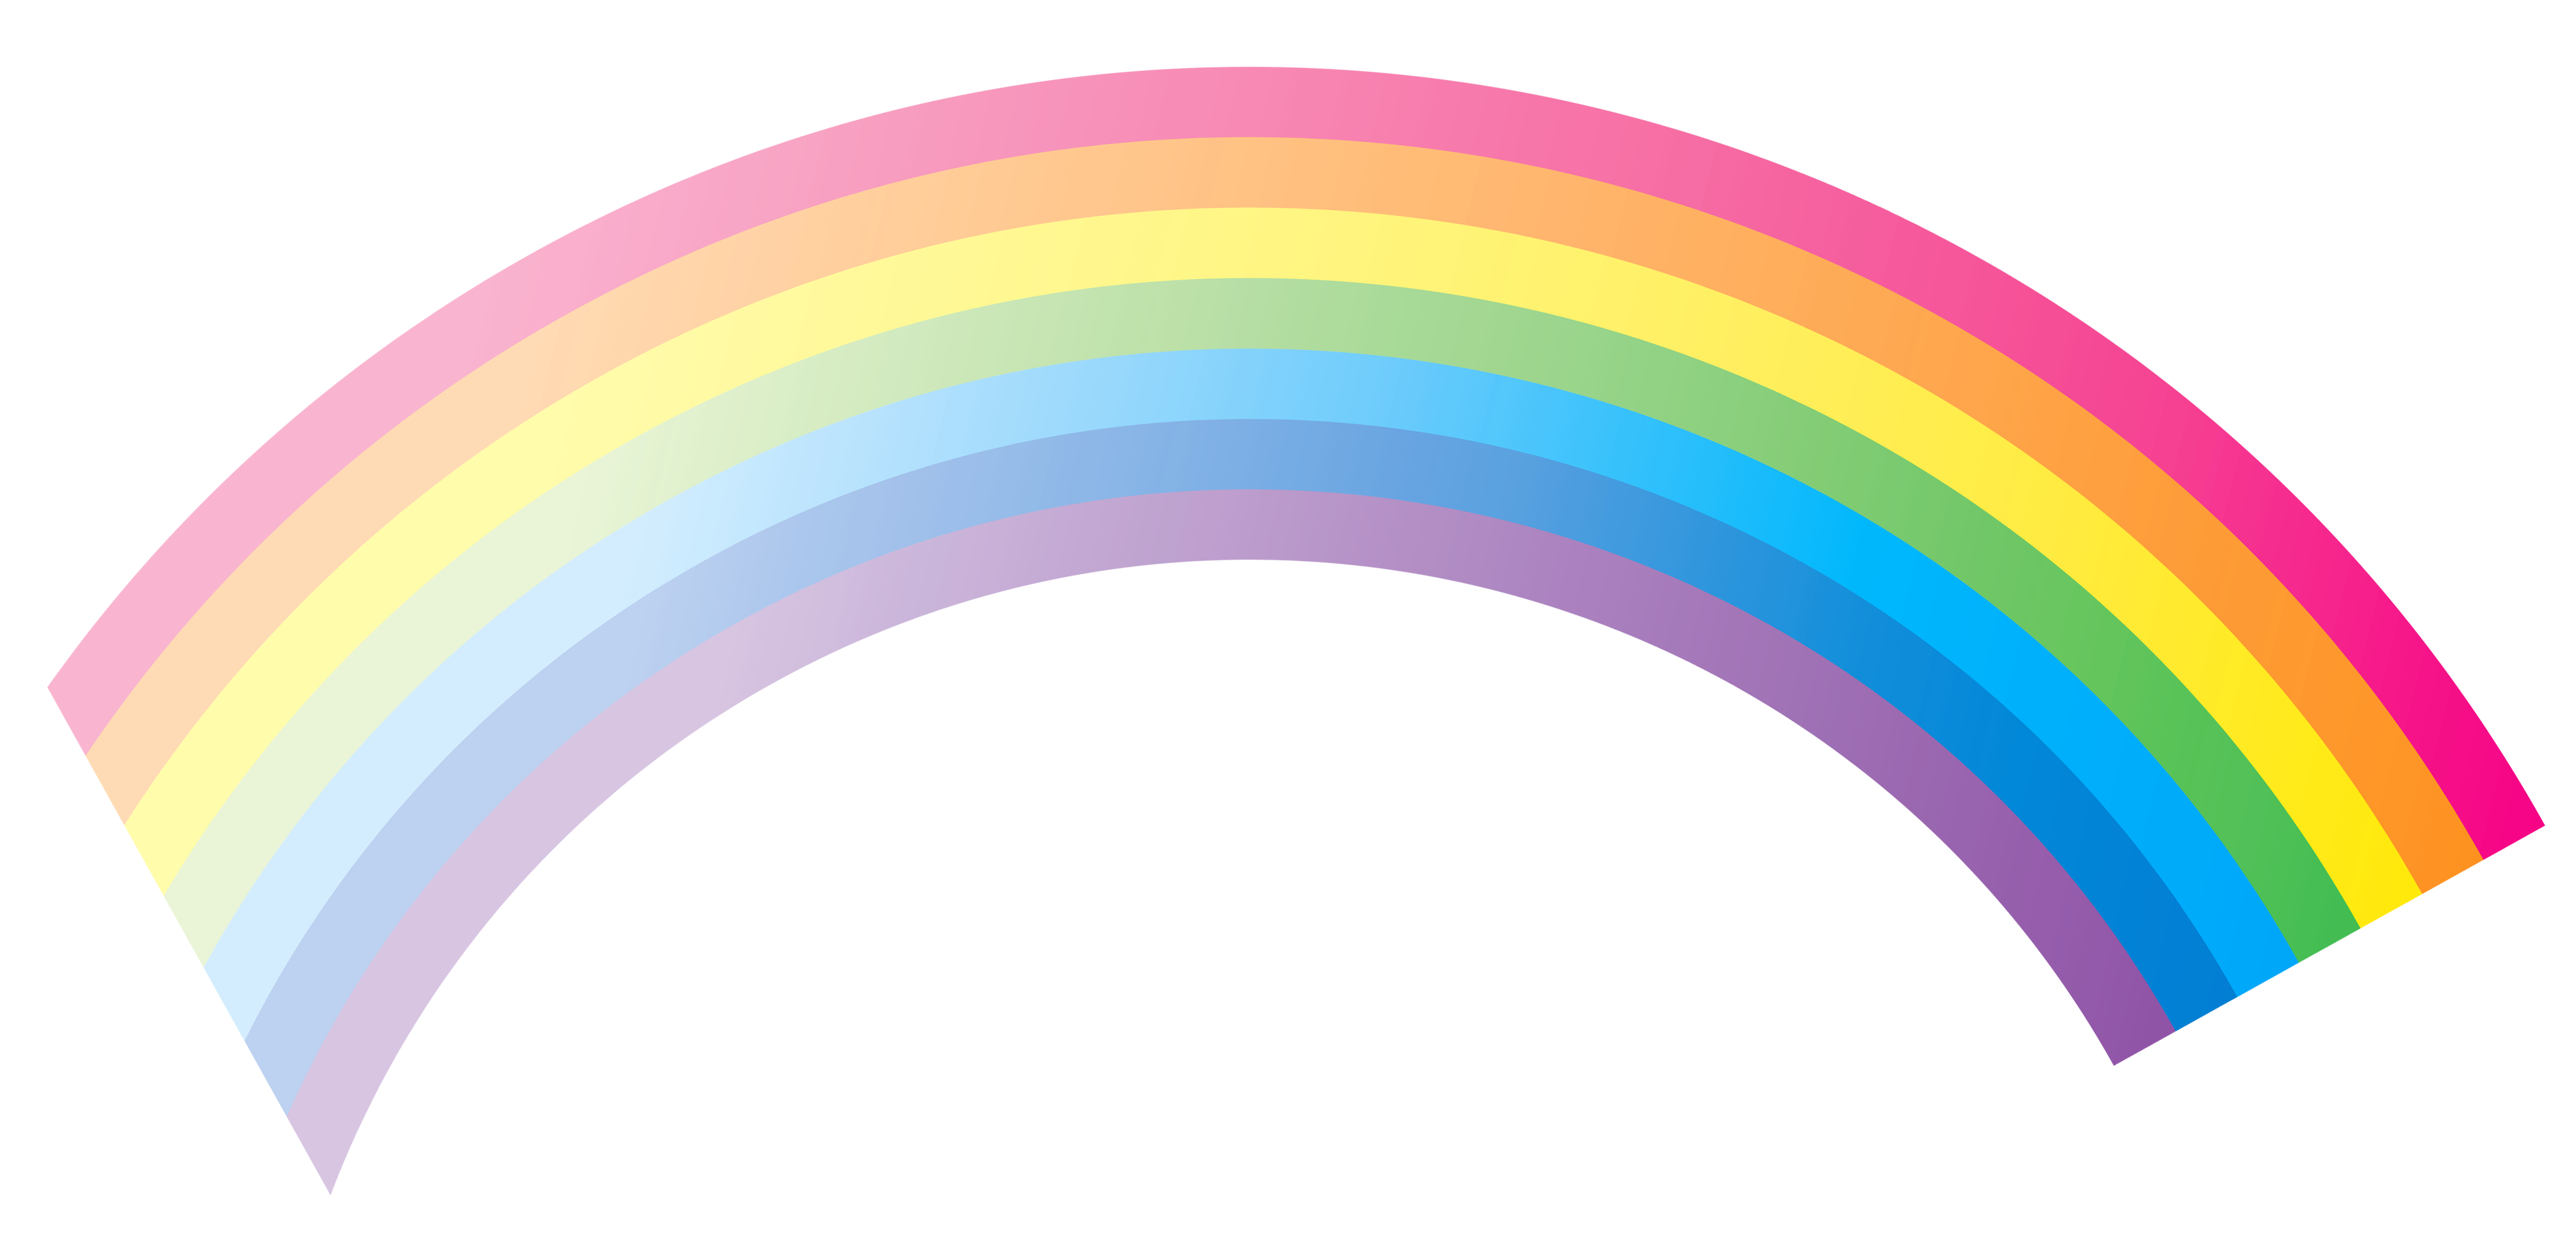 Rainbow PNG Clipart